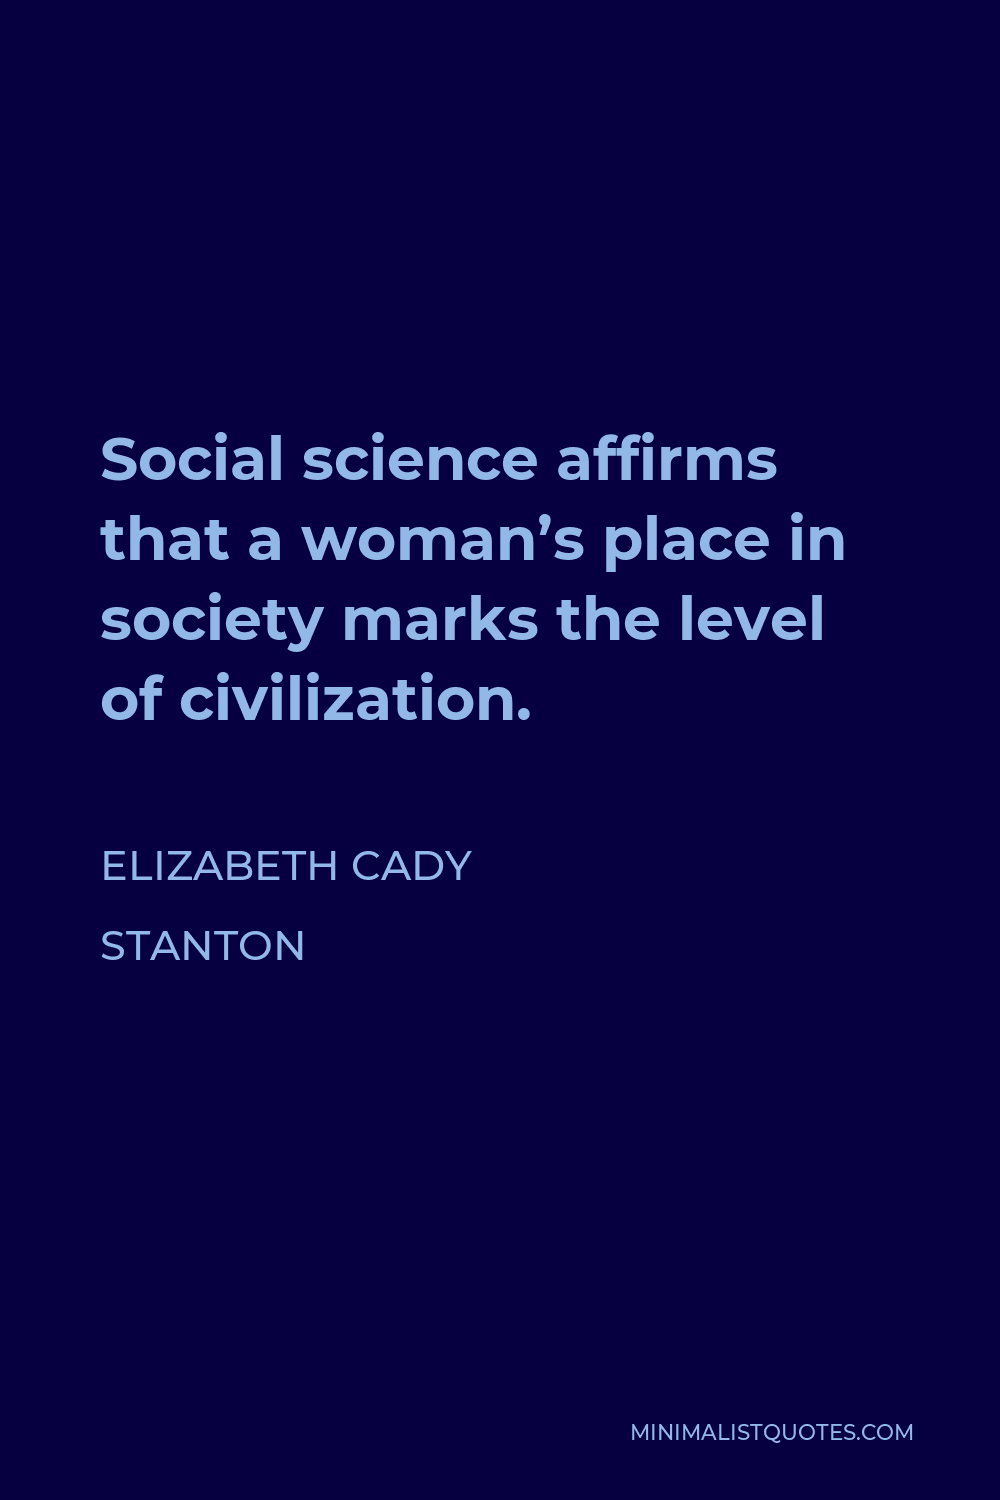 Elizabeth Cady Stanton Quote - Social science affirms that a woman’s place in society marks the level of civilization.